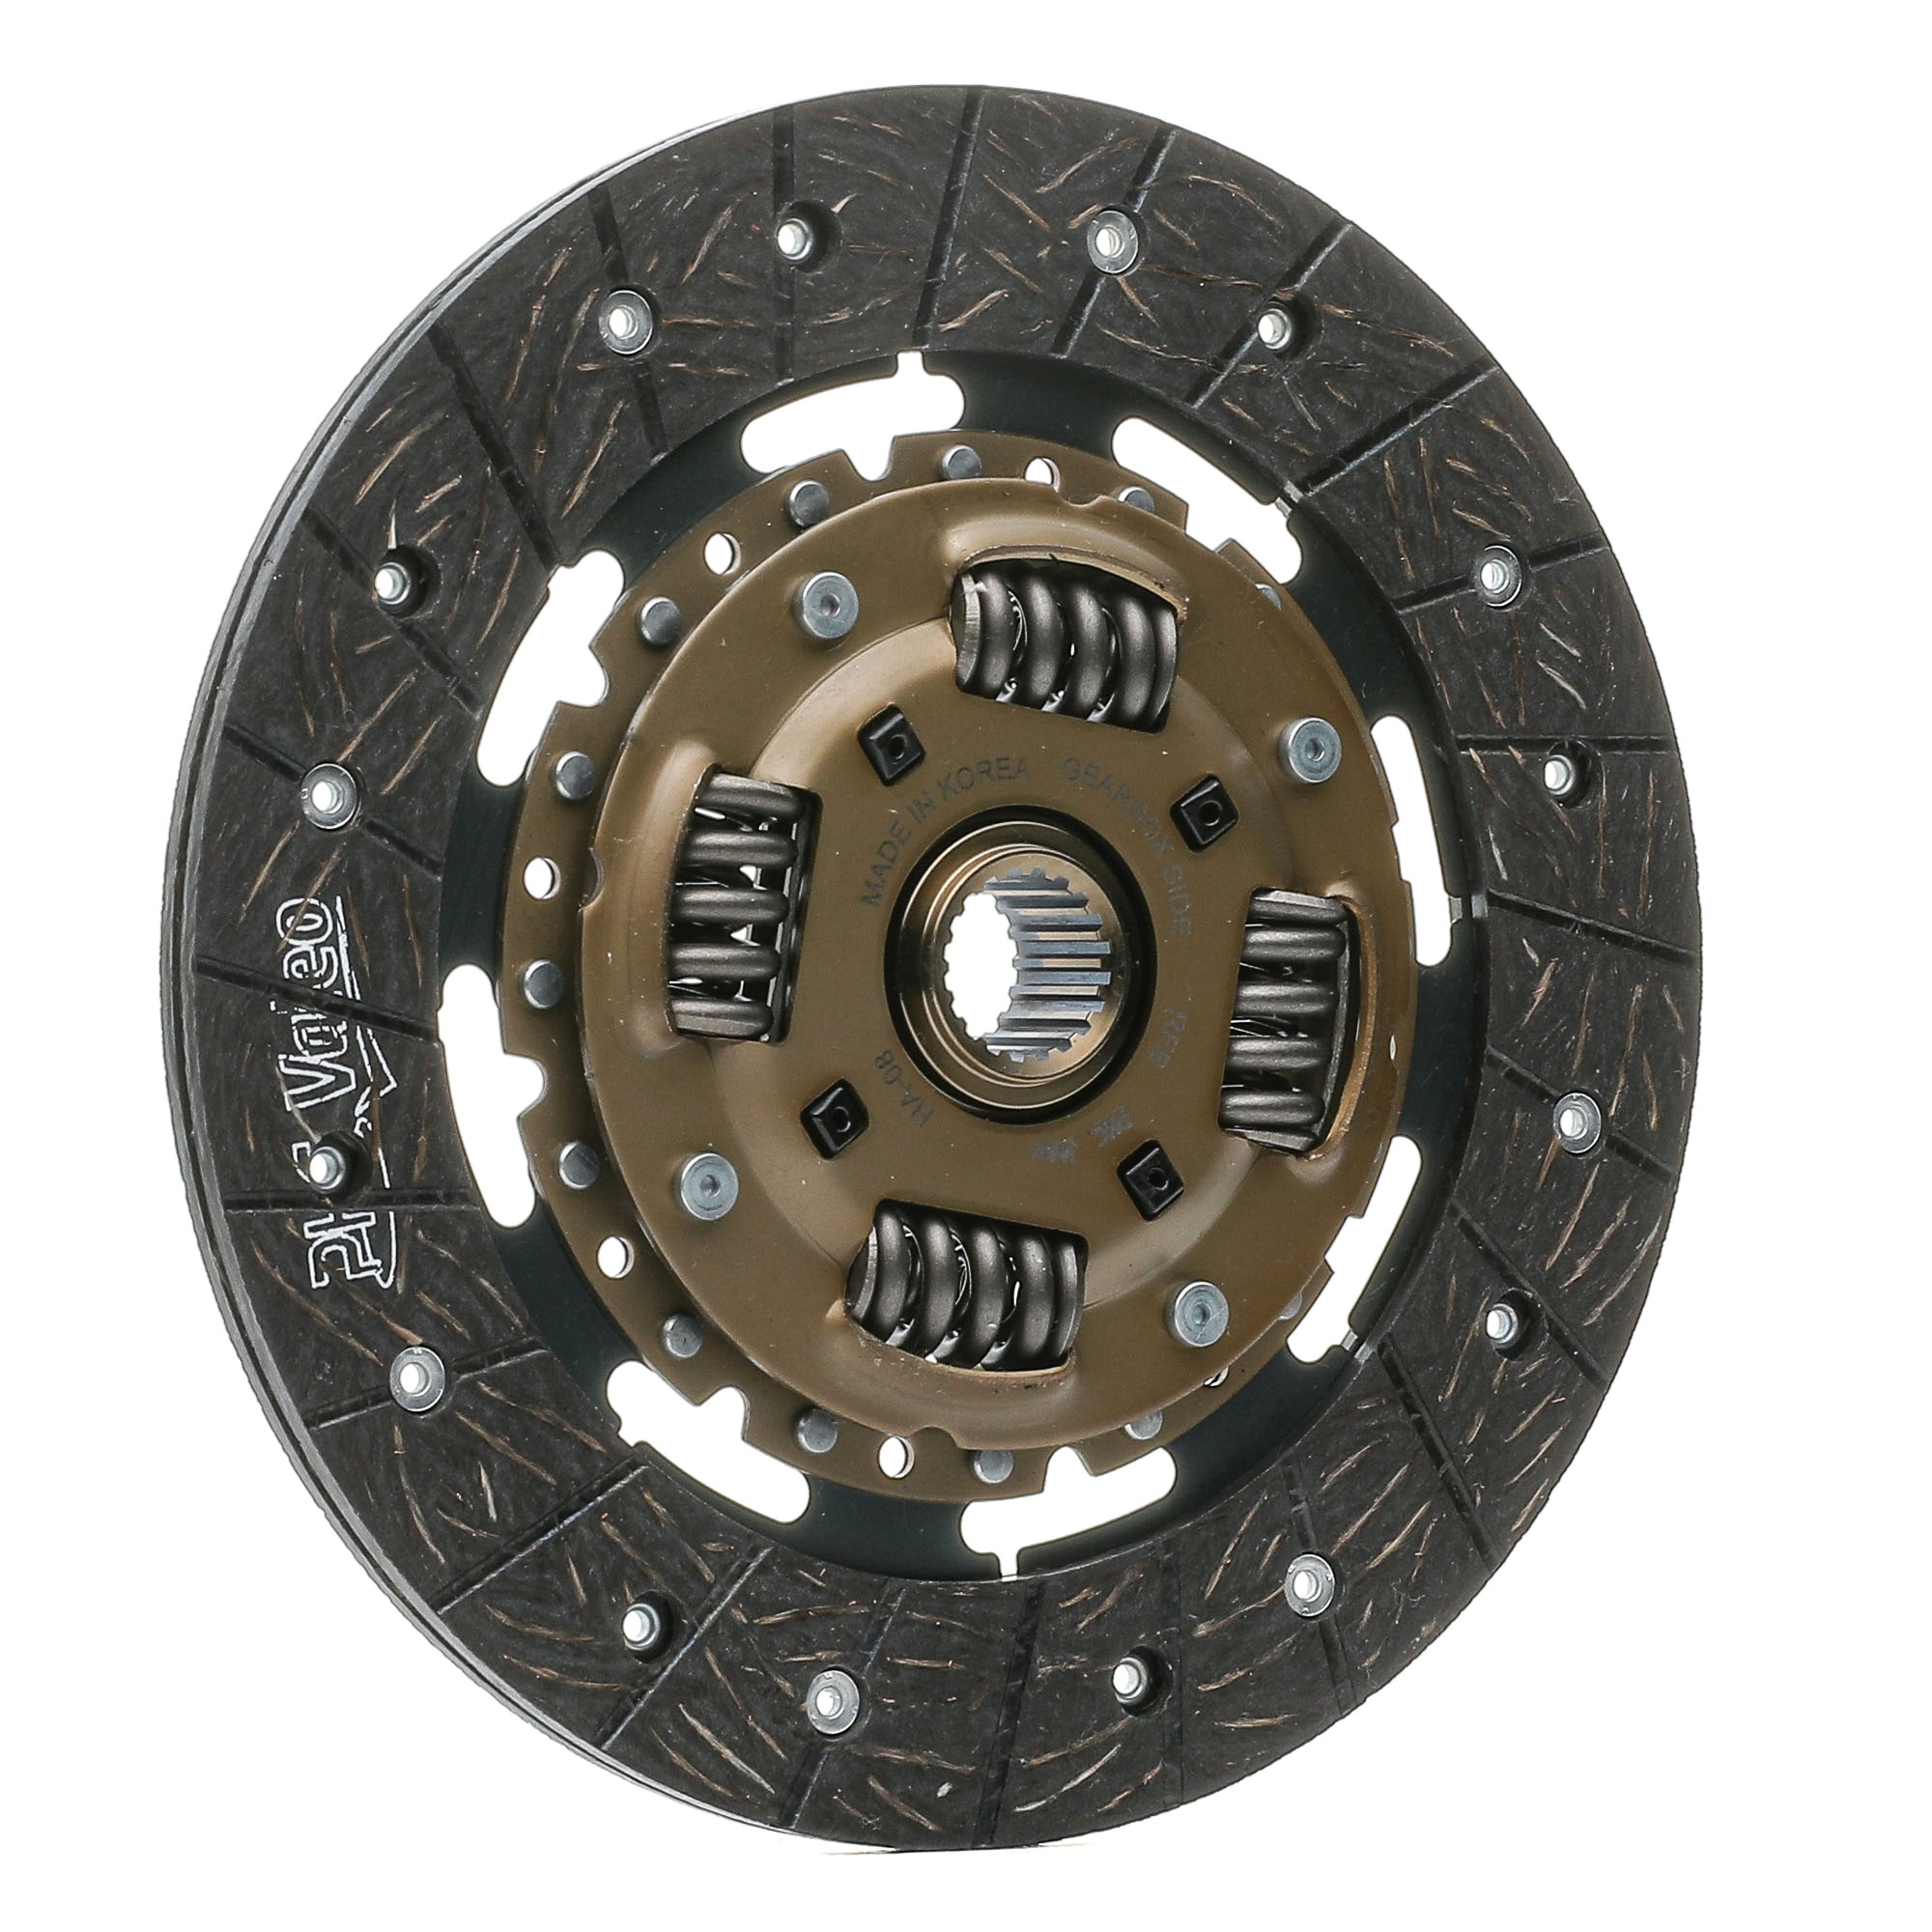 VALEO 803530 Clutch Disc BMW experience and price